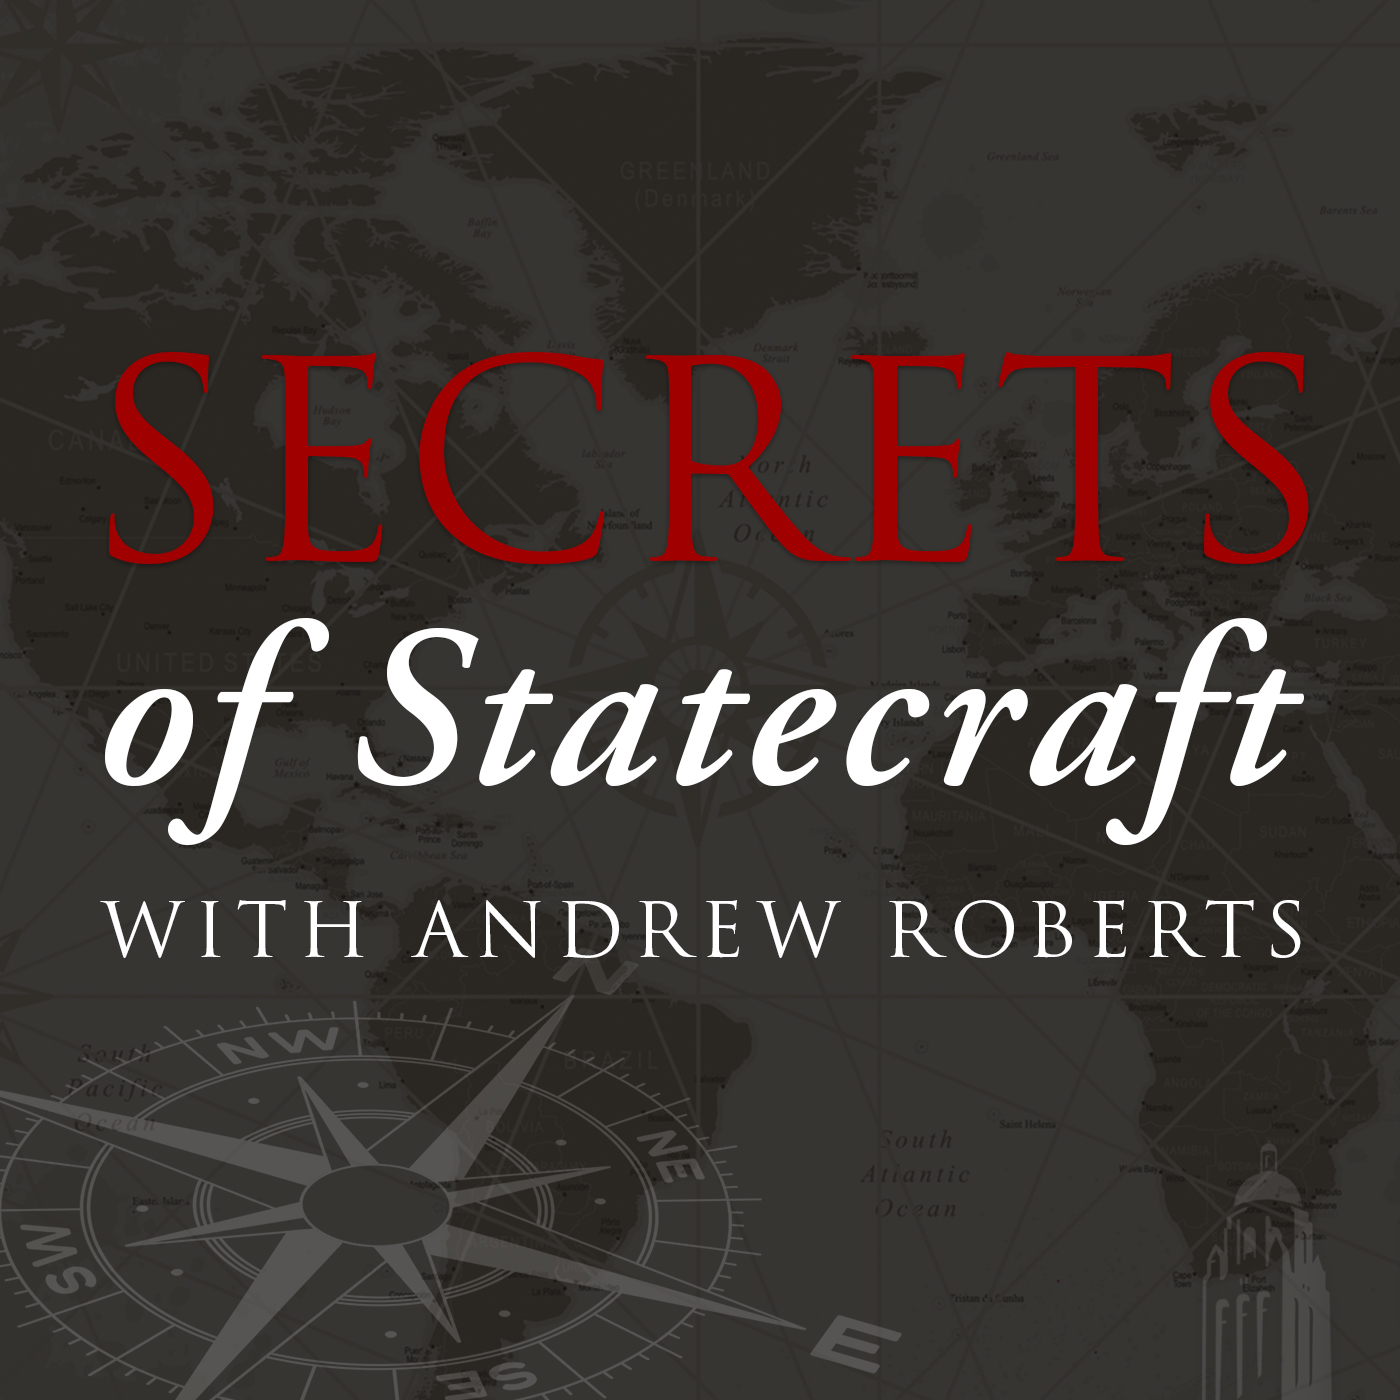 Secrets of Statecraft with Andrew Roberts